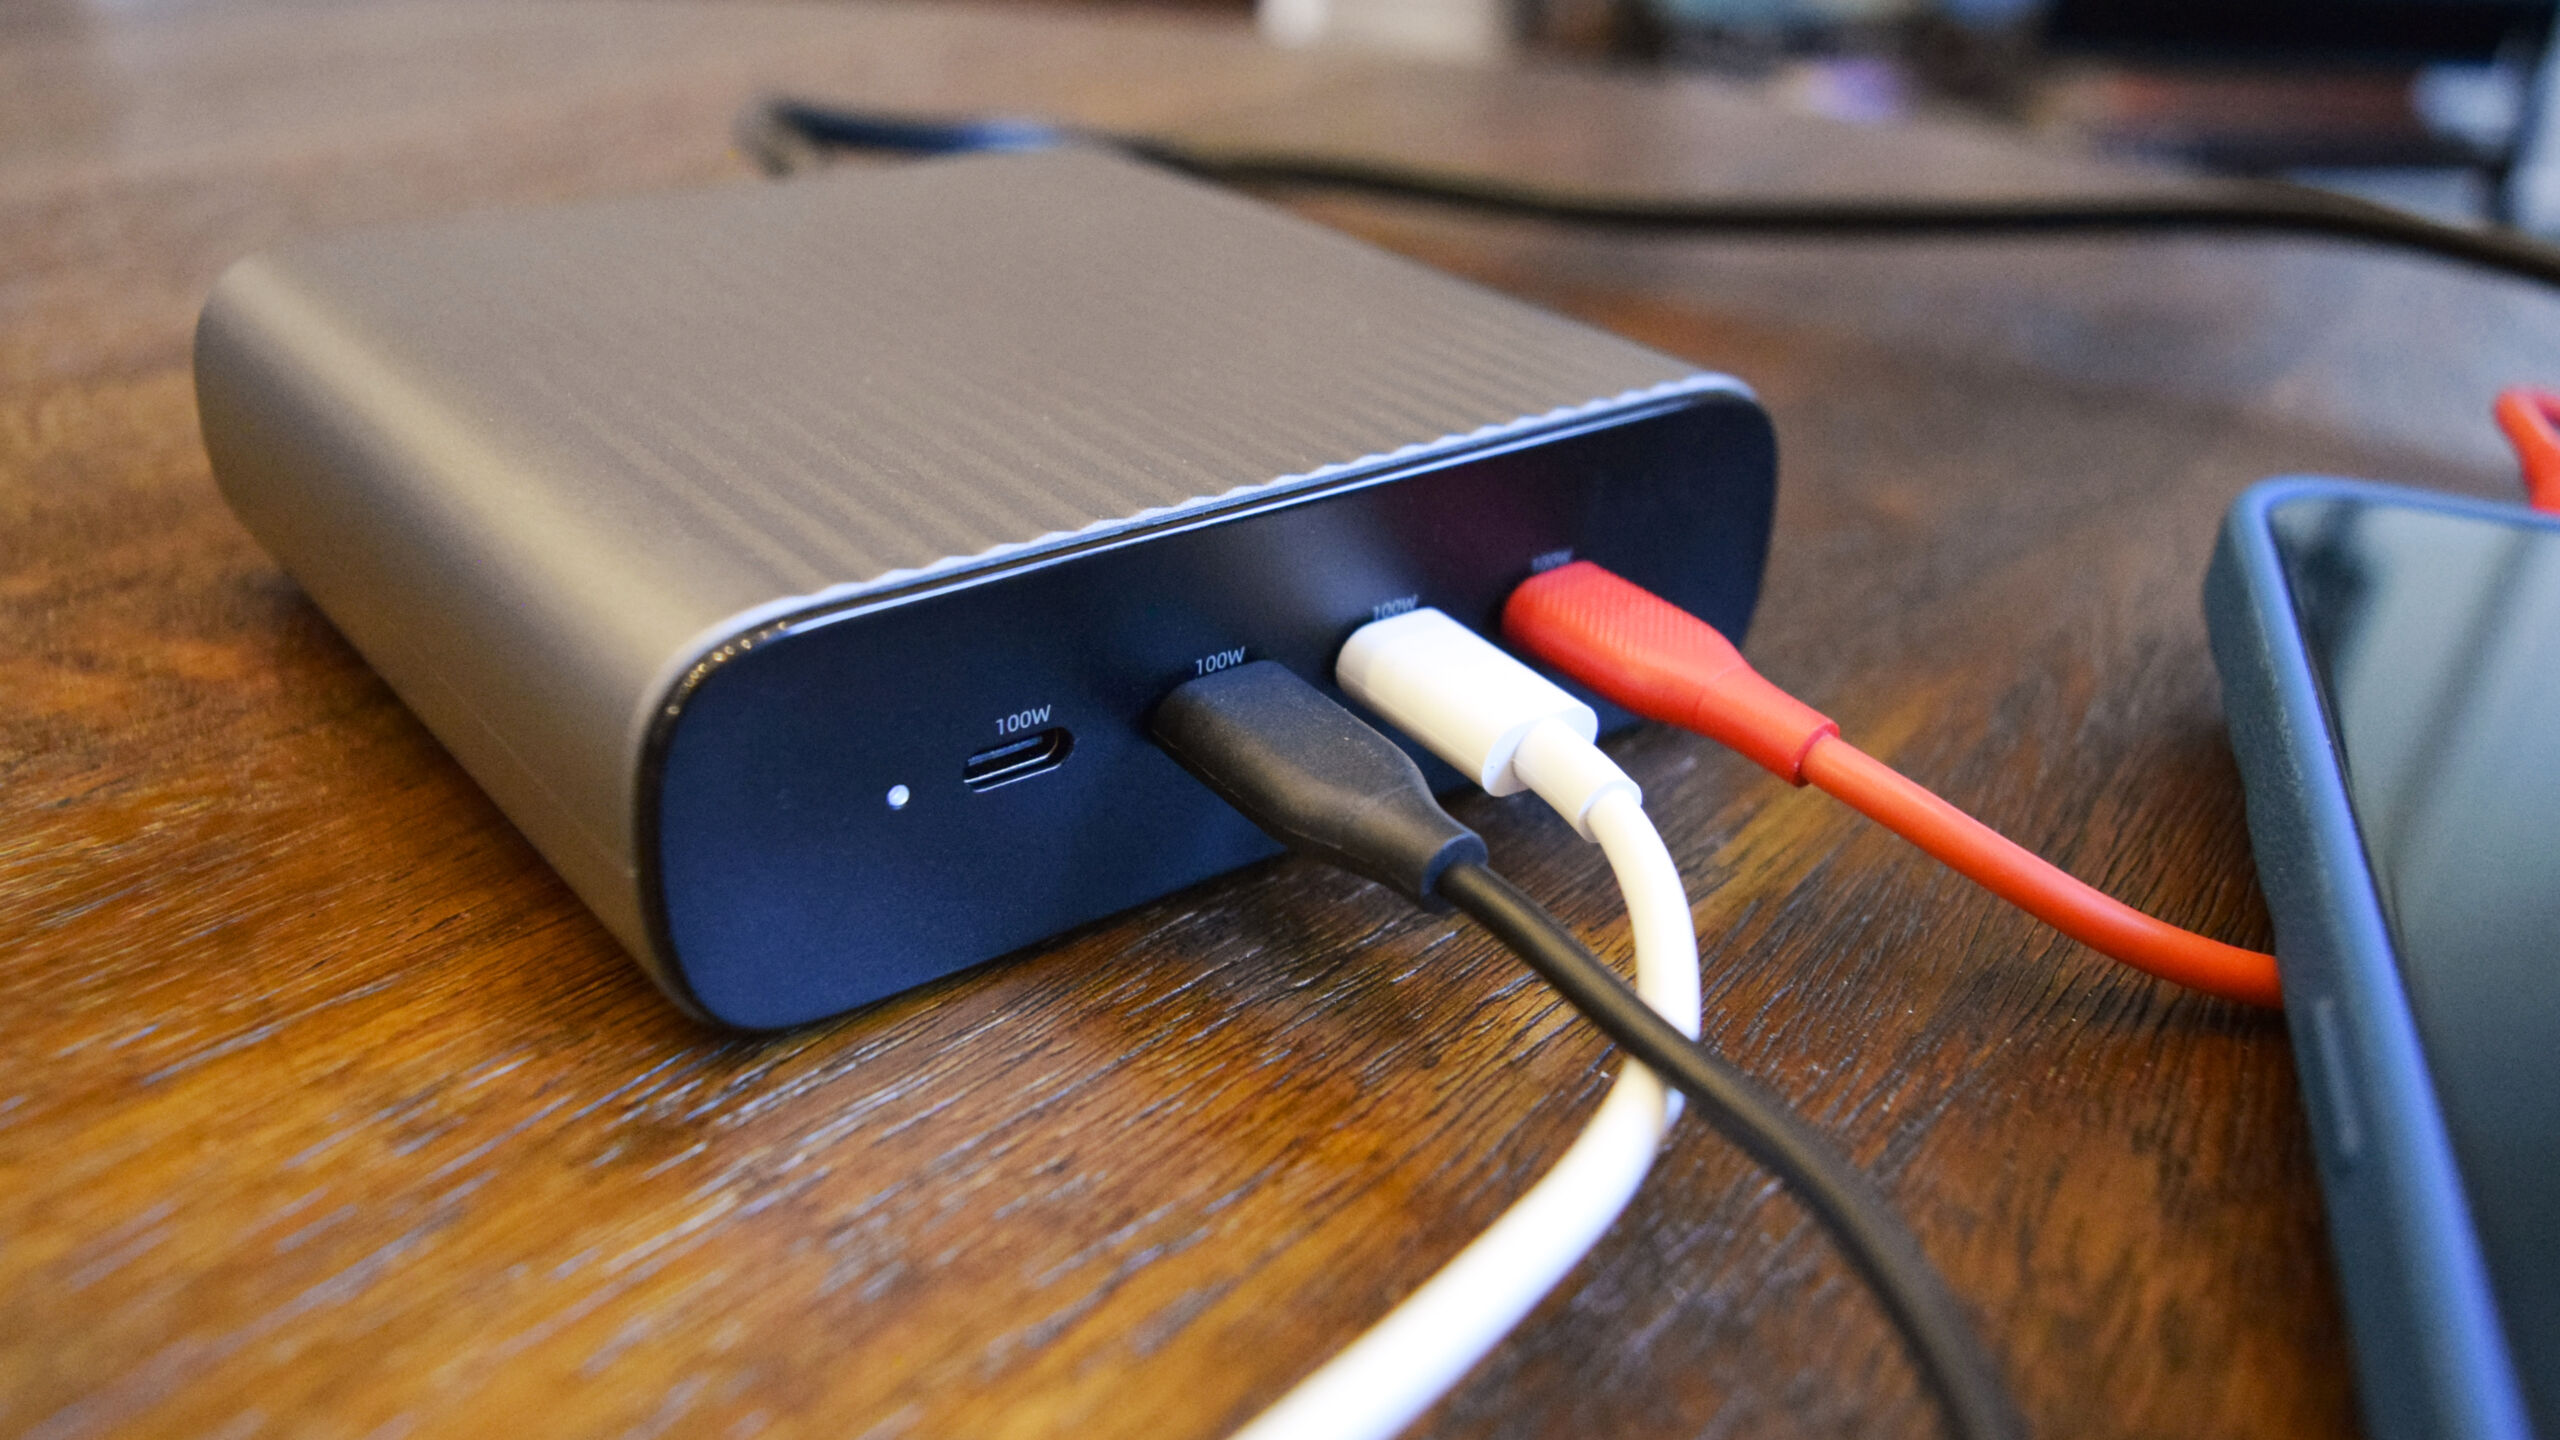 I bought advanced GaN USB-C chargers for all my gear. You should